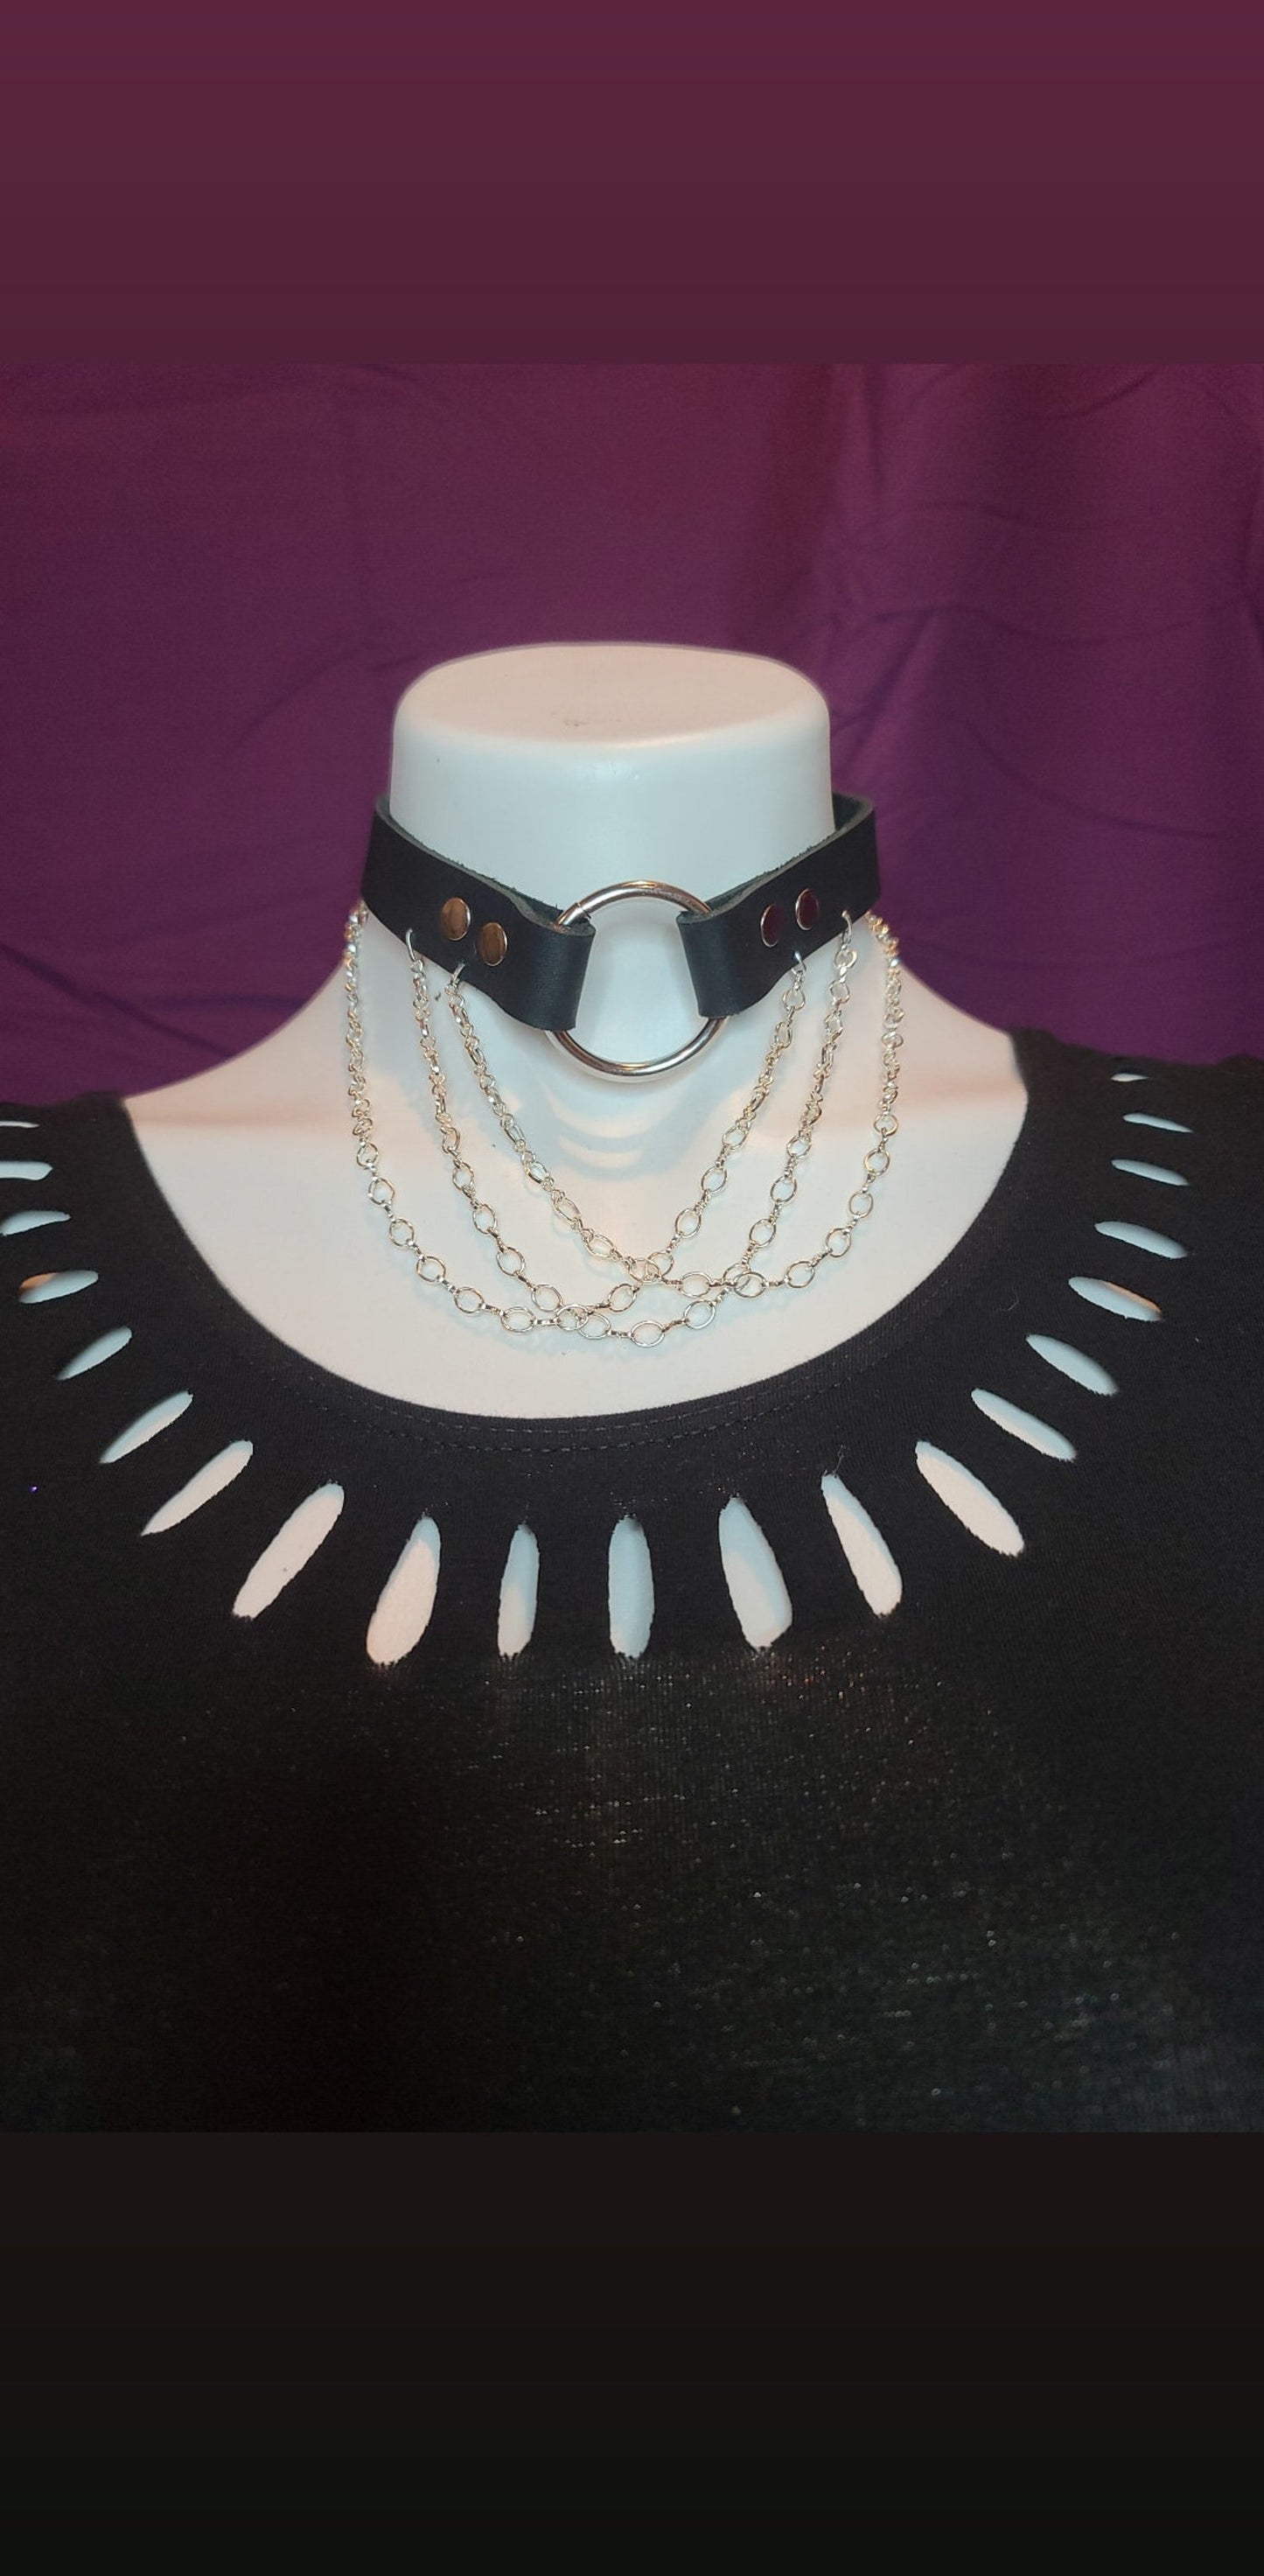 Choker with Chains